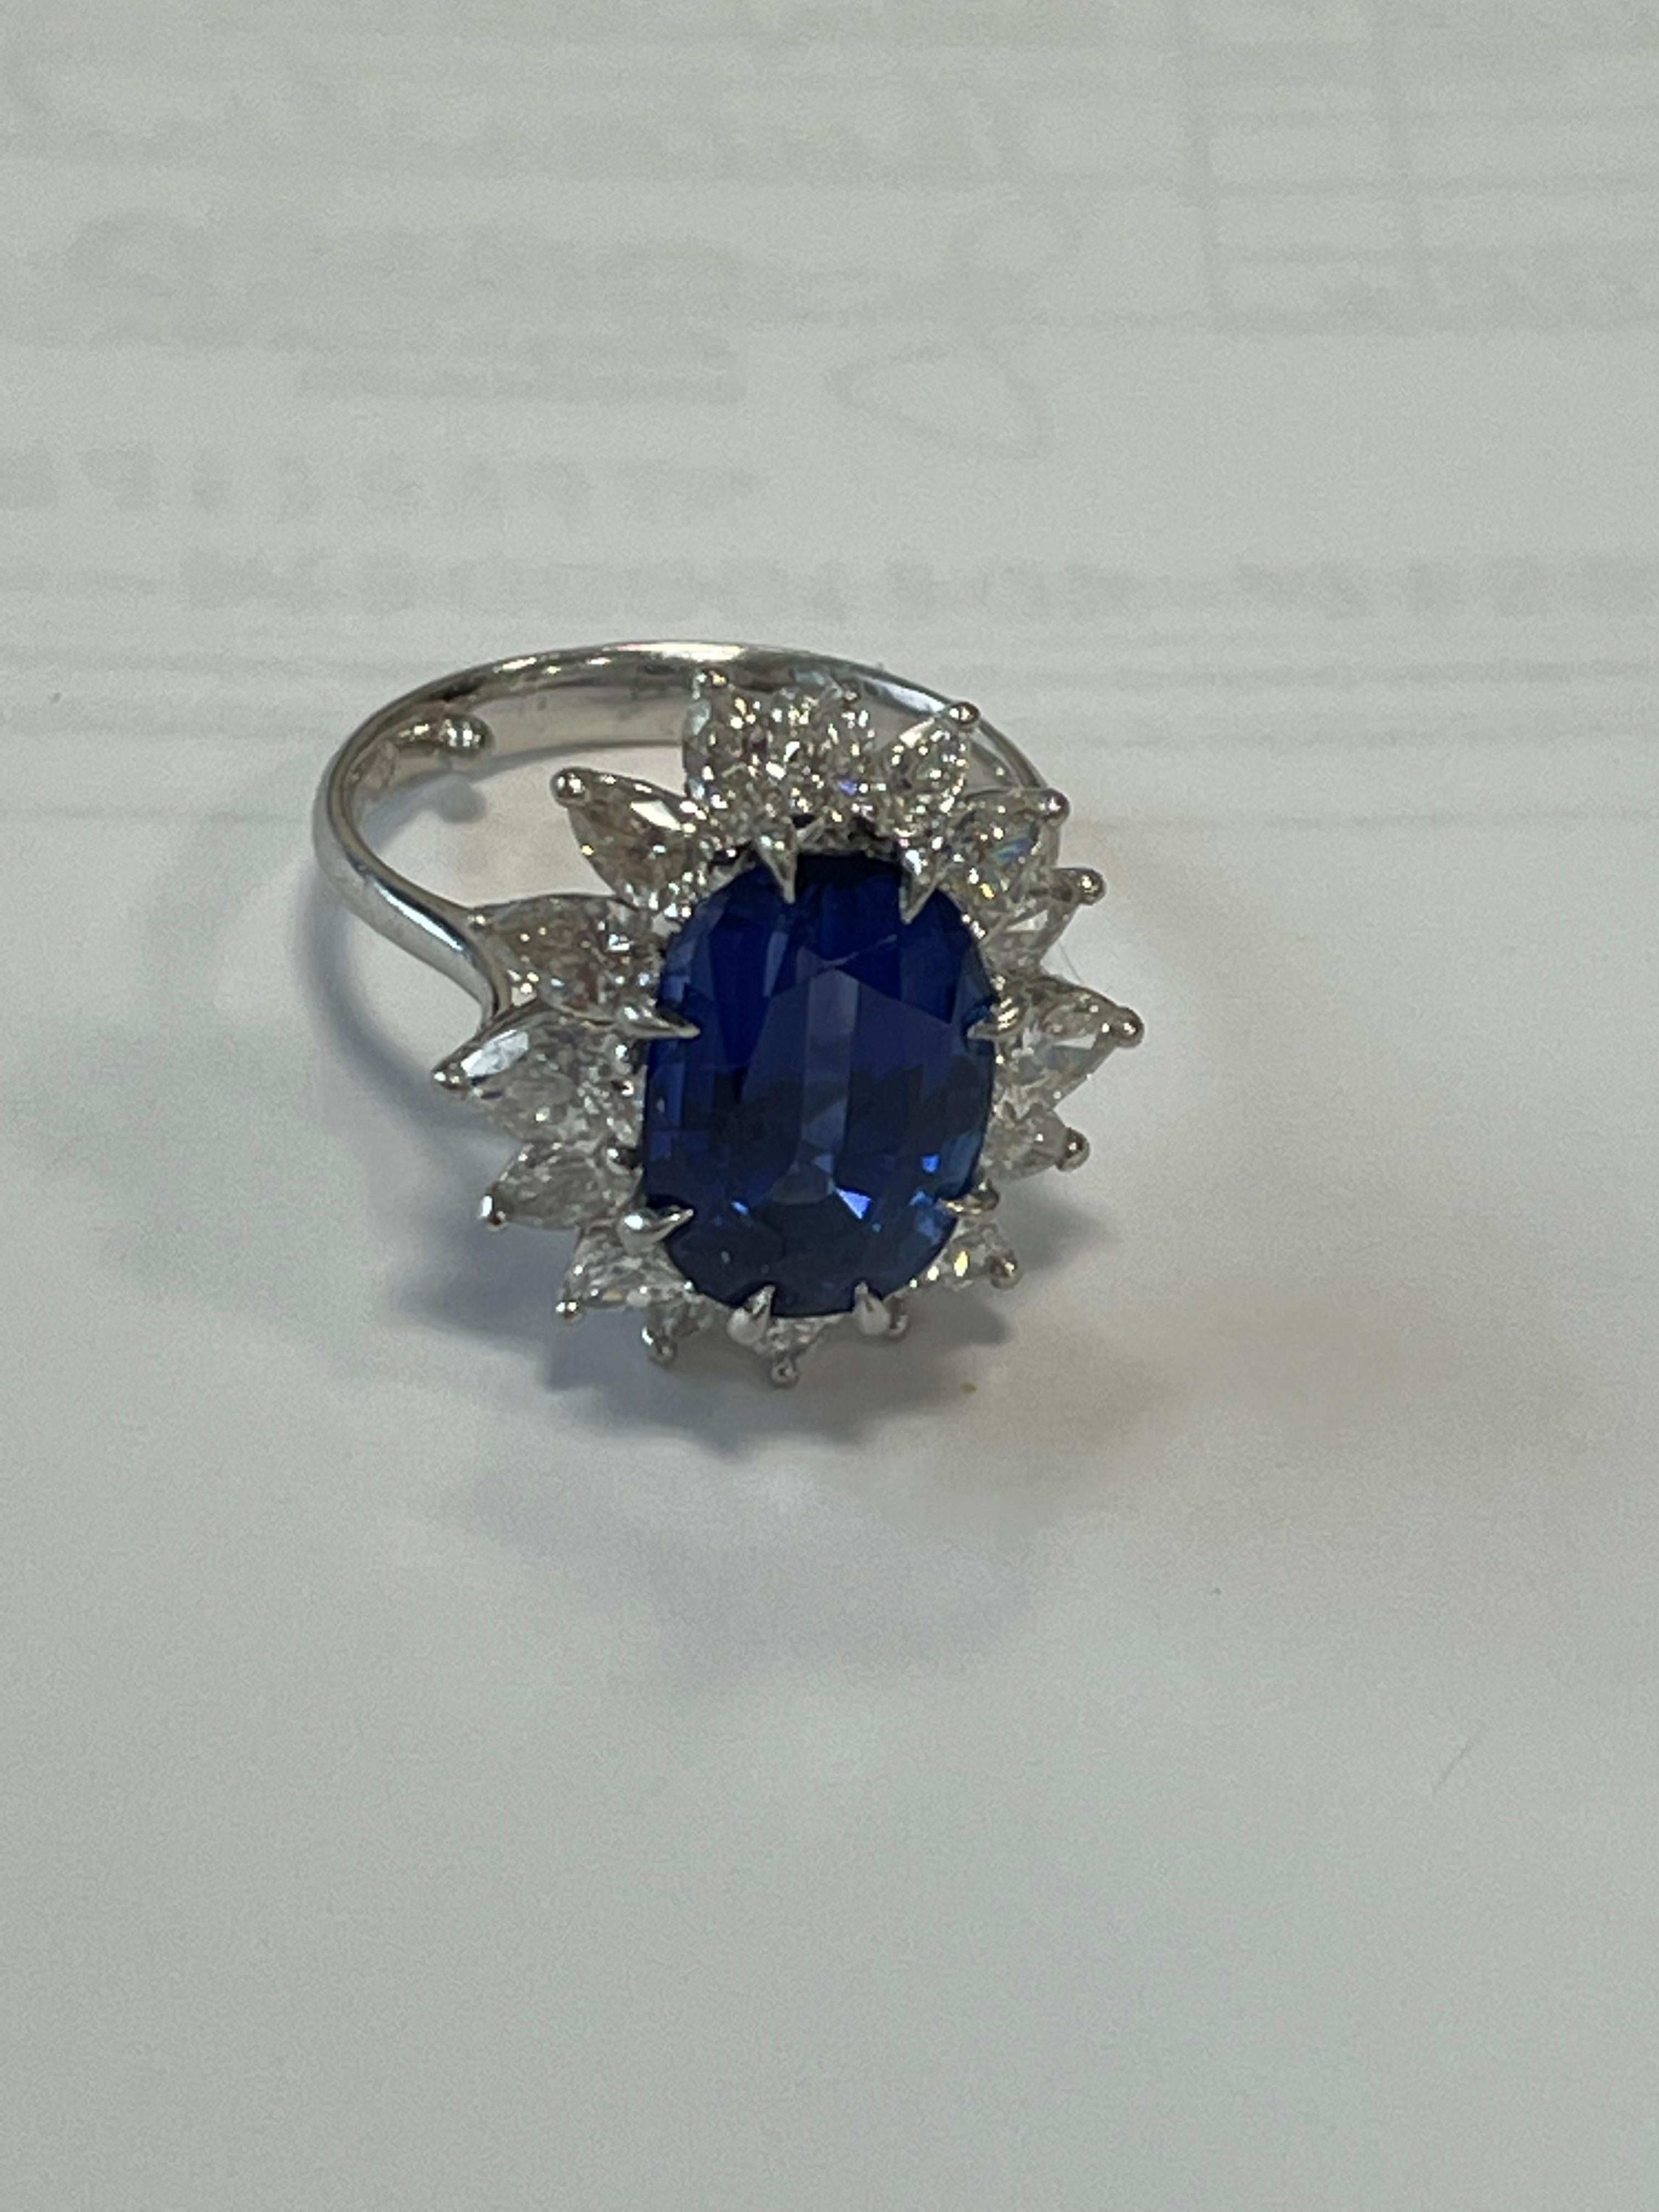 5.30 Ceylon Sapphire 5.30  American Gemological Laboratory (AGL) #cs68197
16 colorless to near colorless Pear Shape diamonds 1.65 carats
handmade wire mounting by McTigue